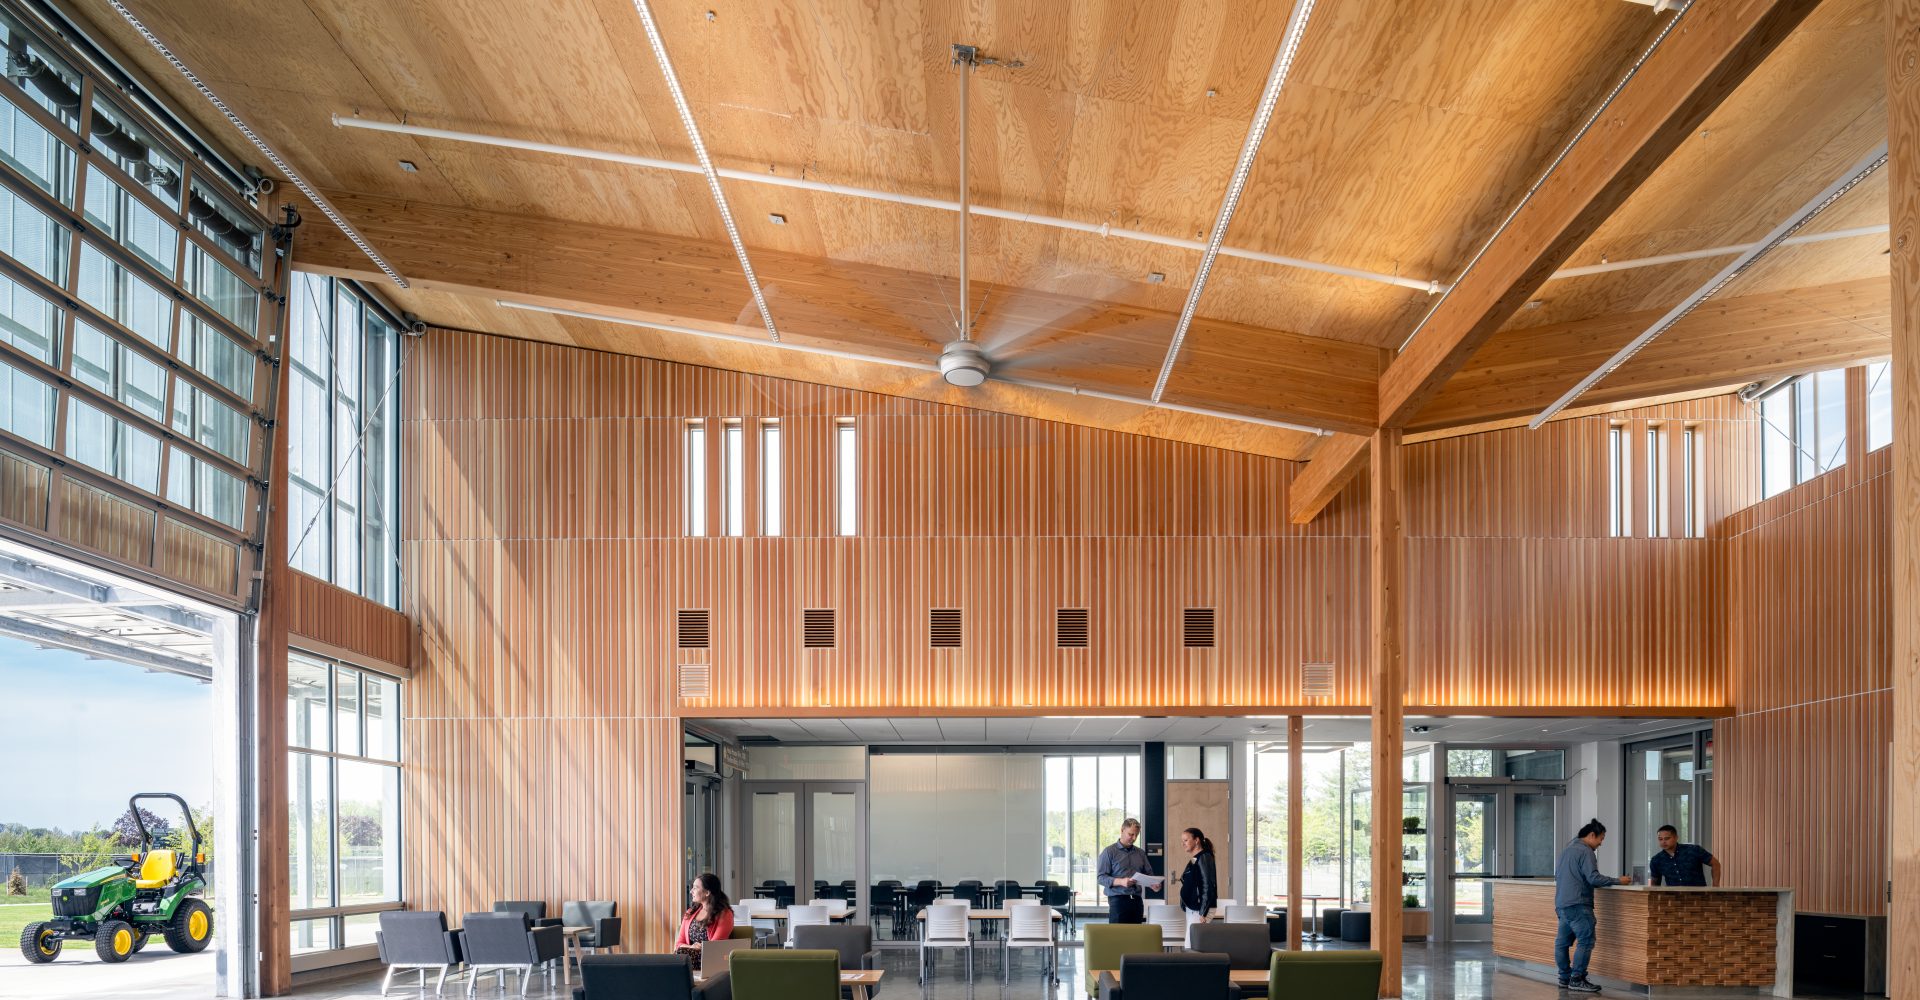 A Mass Timber building in Oregon that showcases wood's natural strength, beauty, and human-centric design.